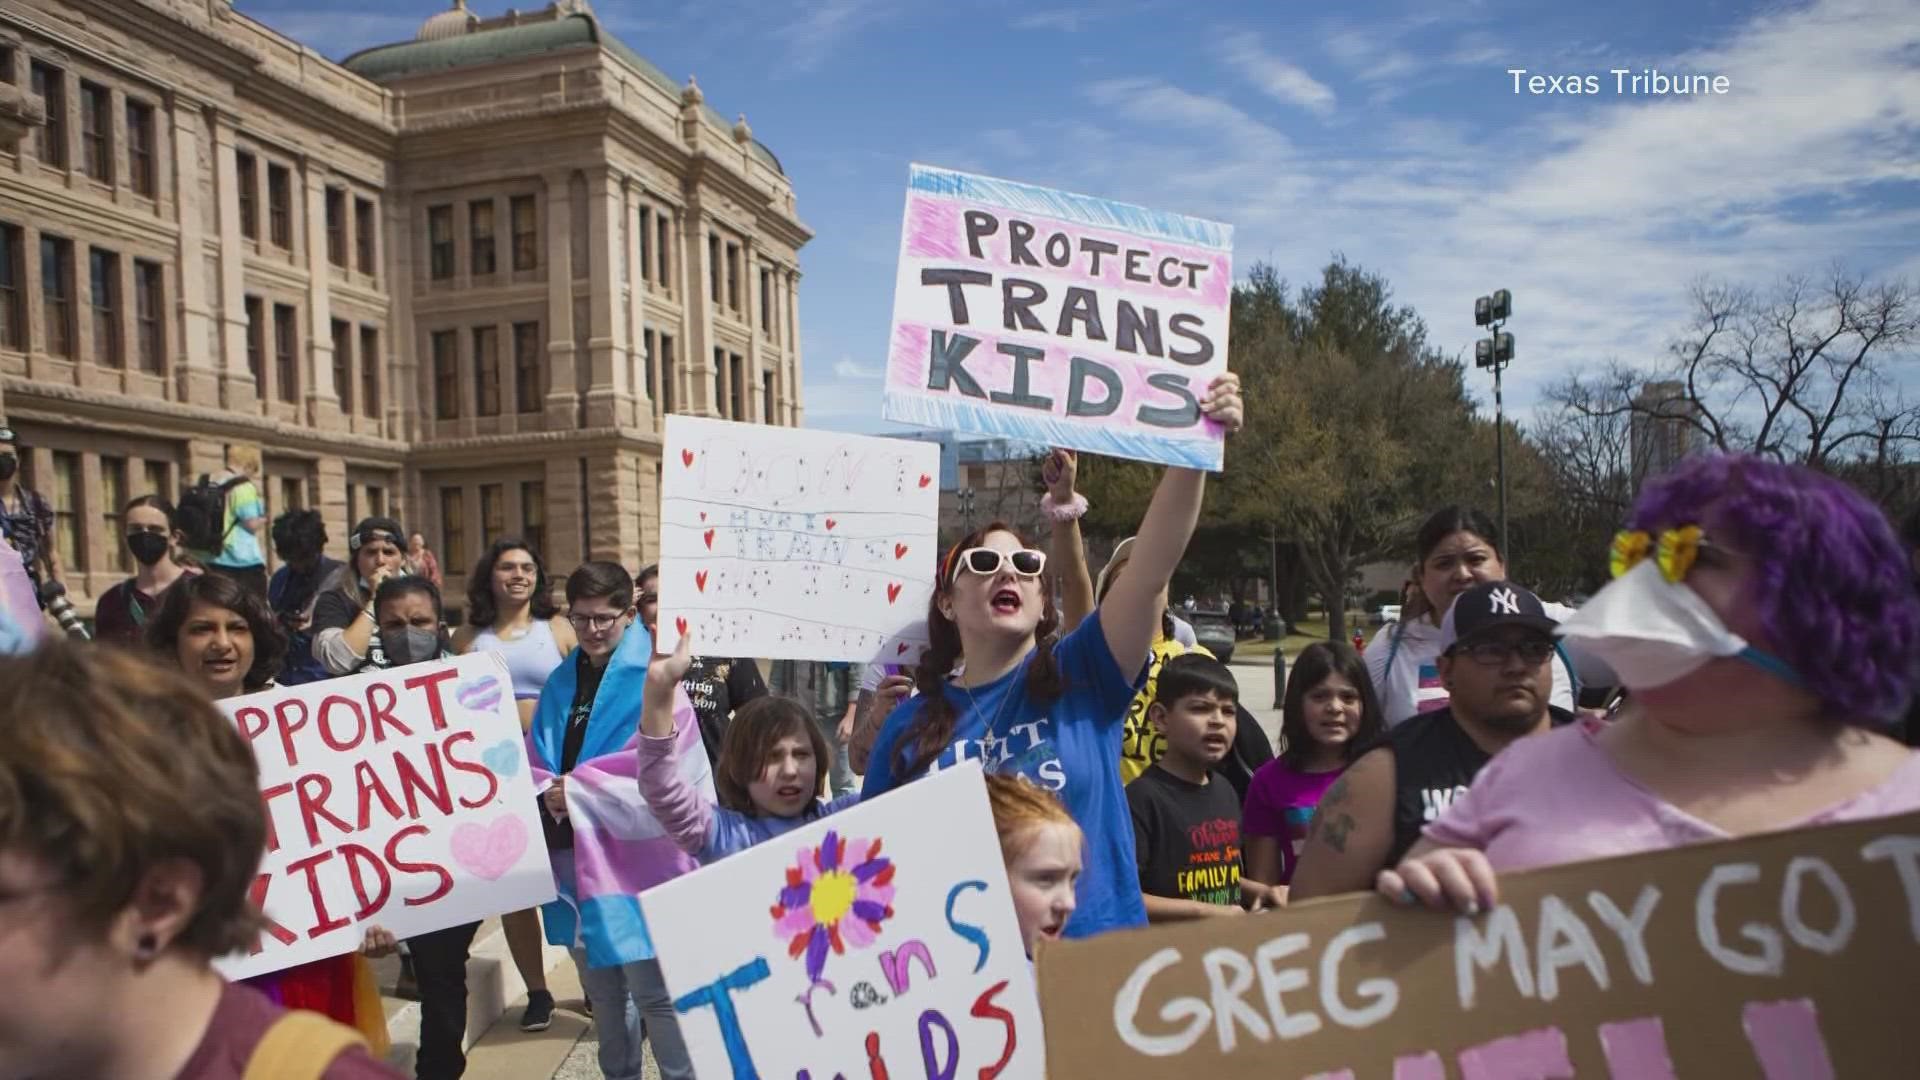 Governor Abbott’s directive to the Department of Family and Protective Services is to investigate some parents of transgender children for potential child abuse.